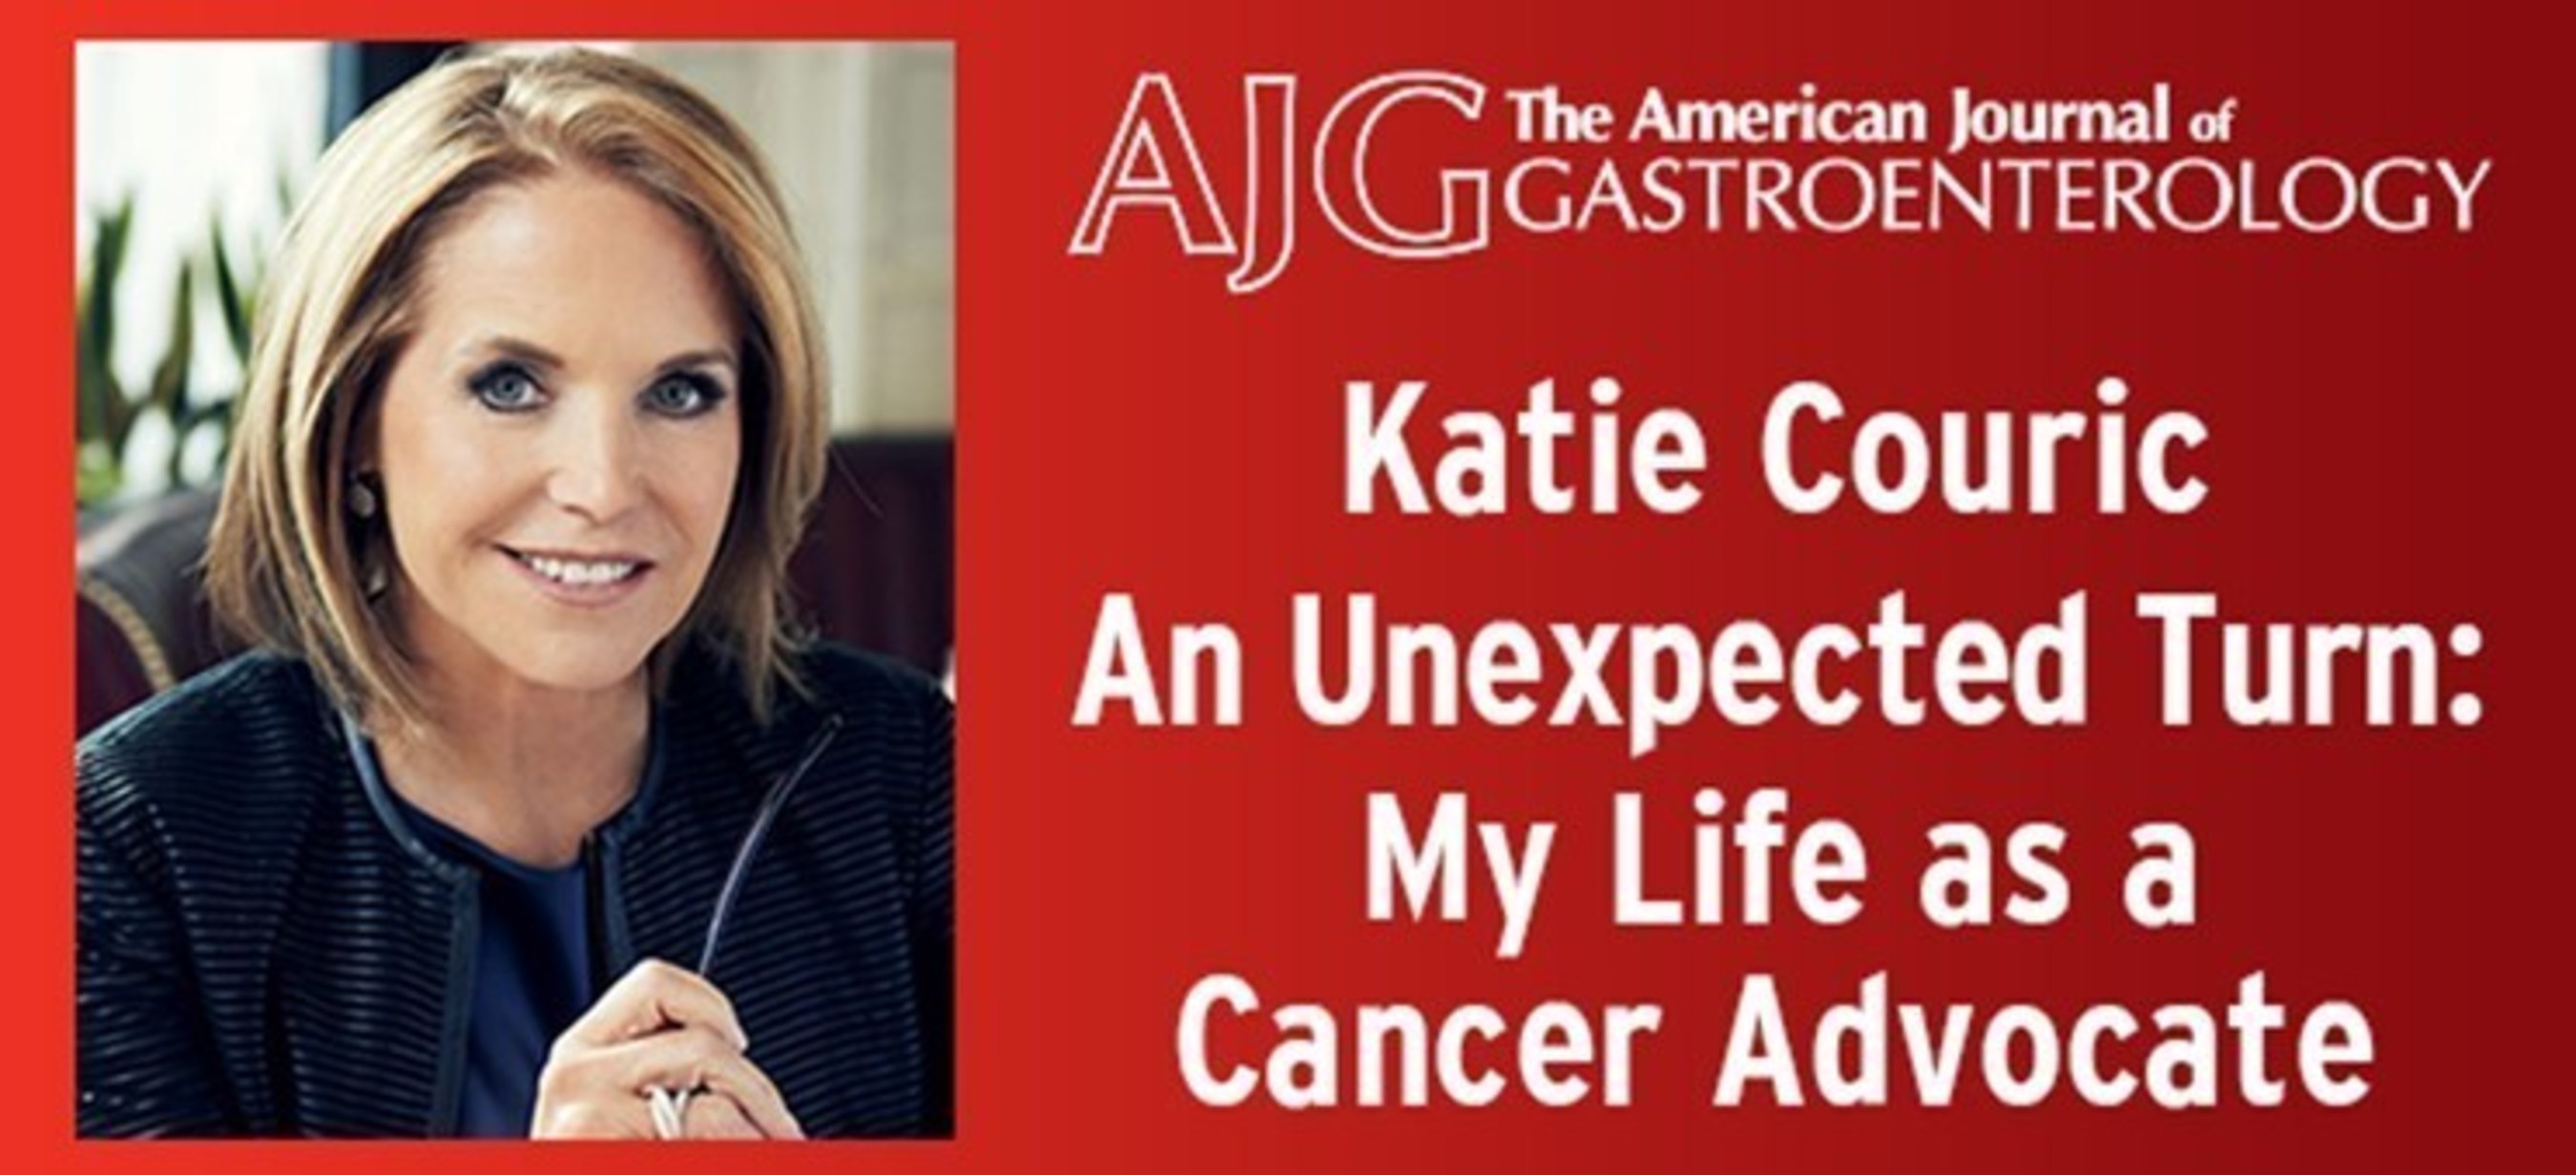 Katie Couric in The American Journal of Gastroenterology